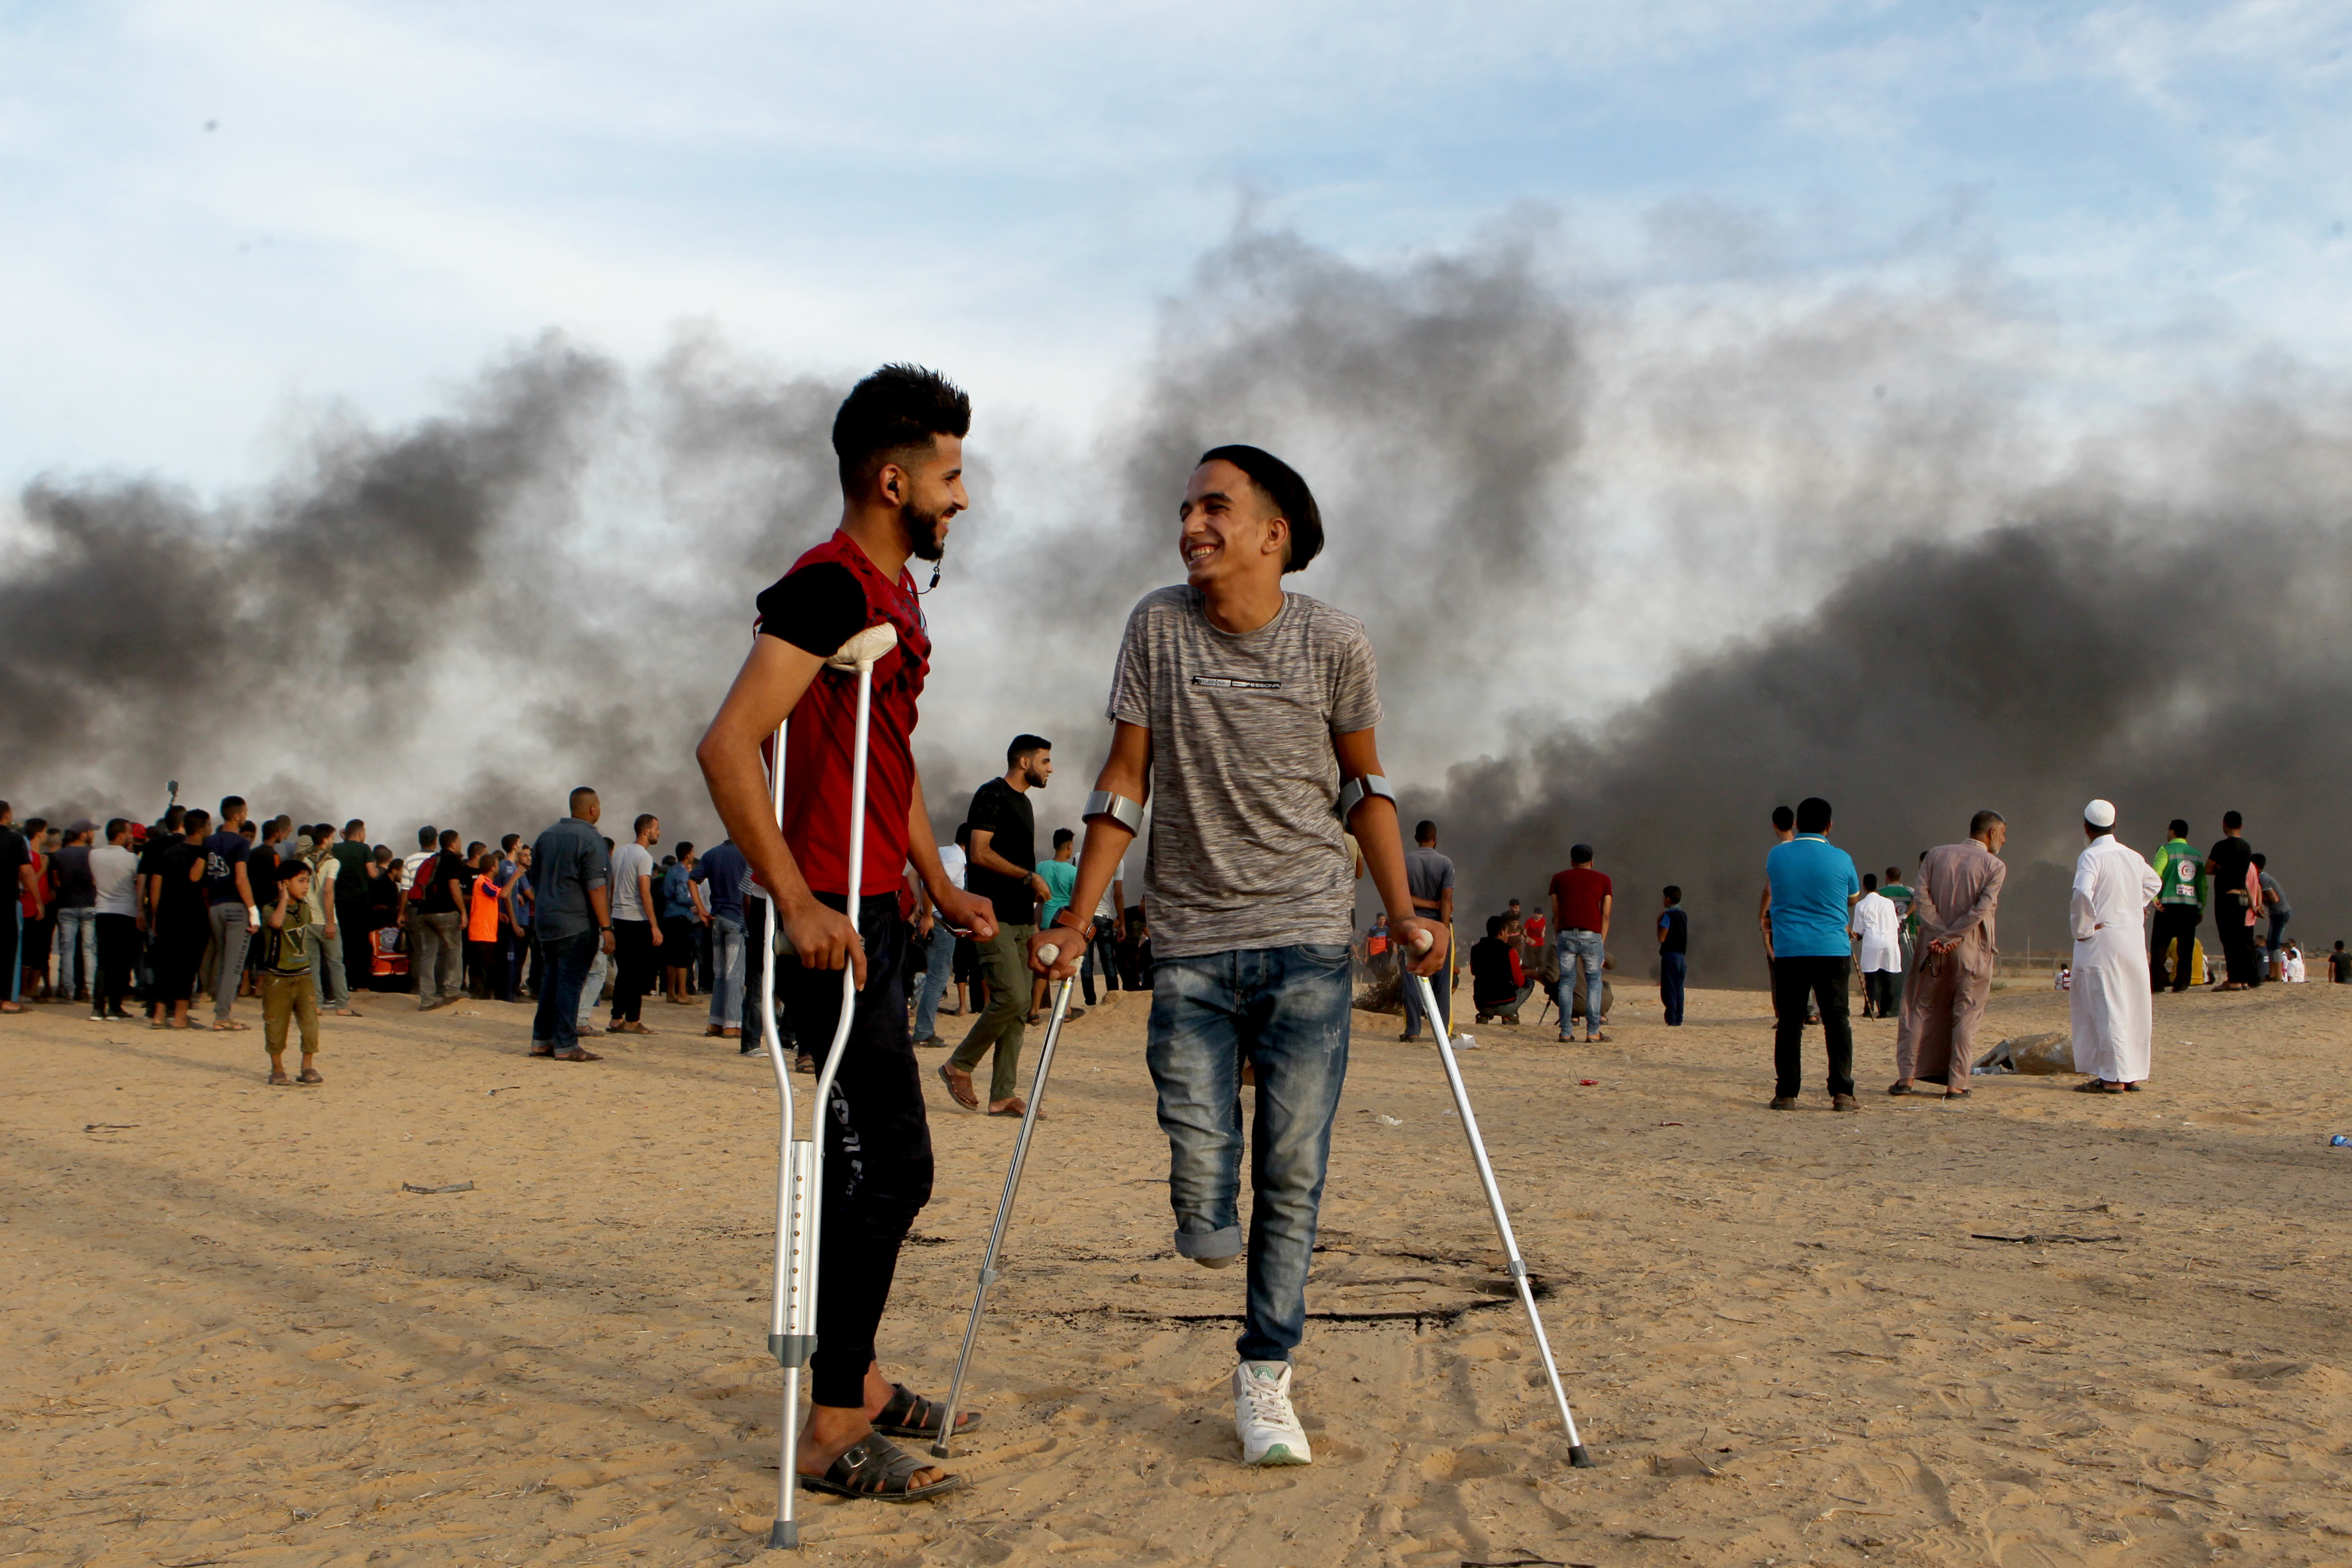 The Gaza trauma response: WHO conducted a one-year analysis of trauma injuries in Gaza